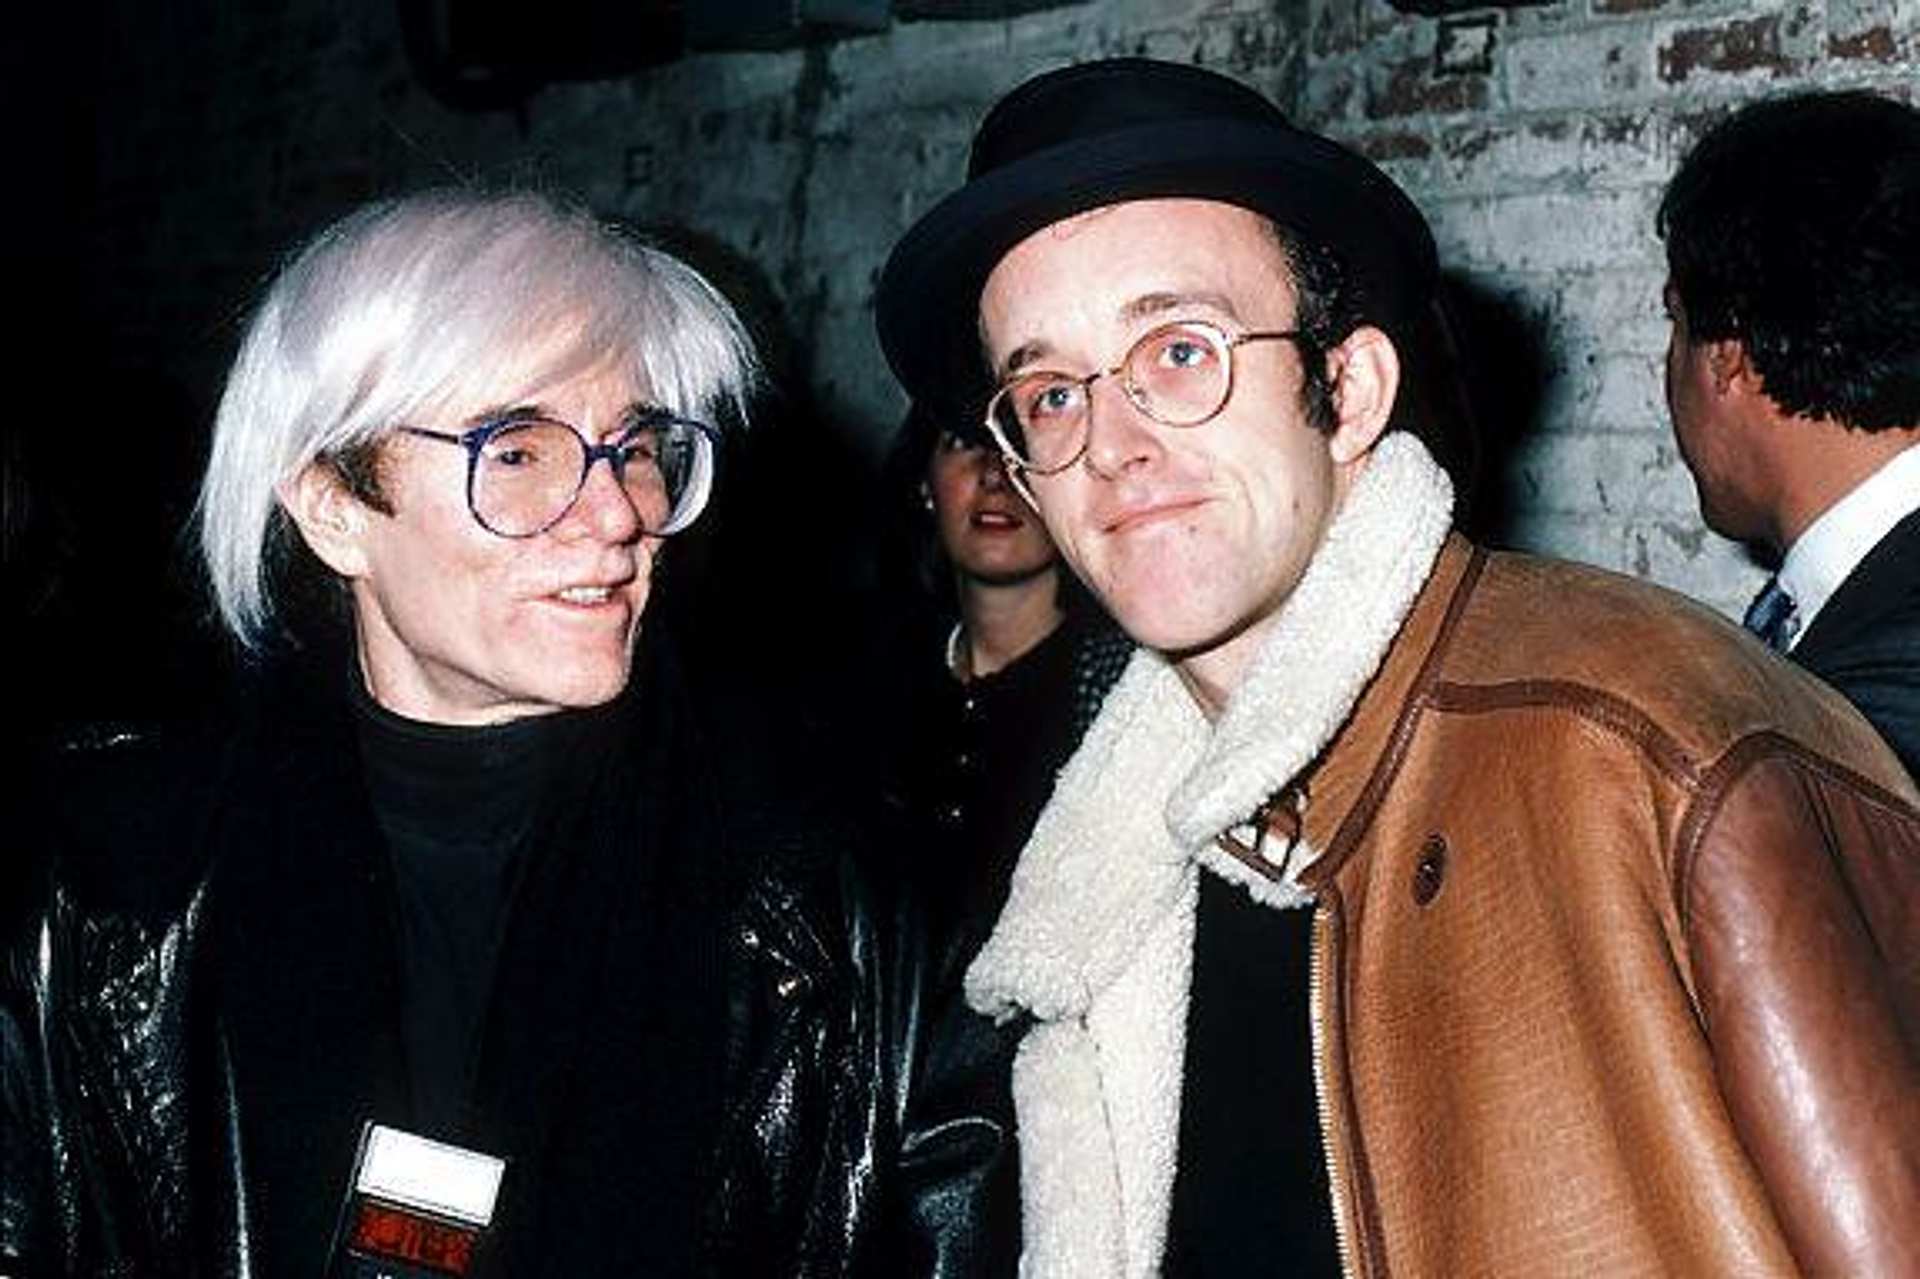 Keith Haring & Andy Warhol: A Friendship That Shaped Pop Art